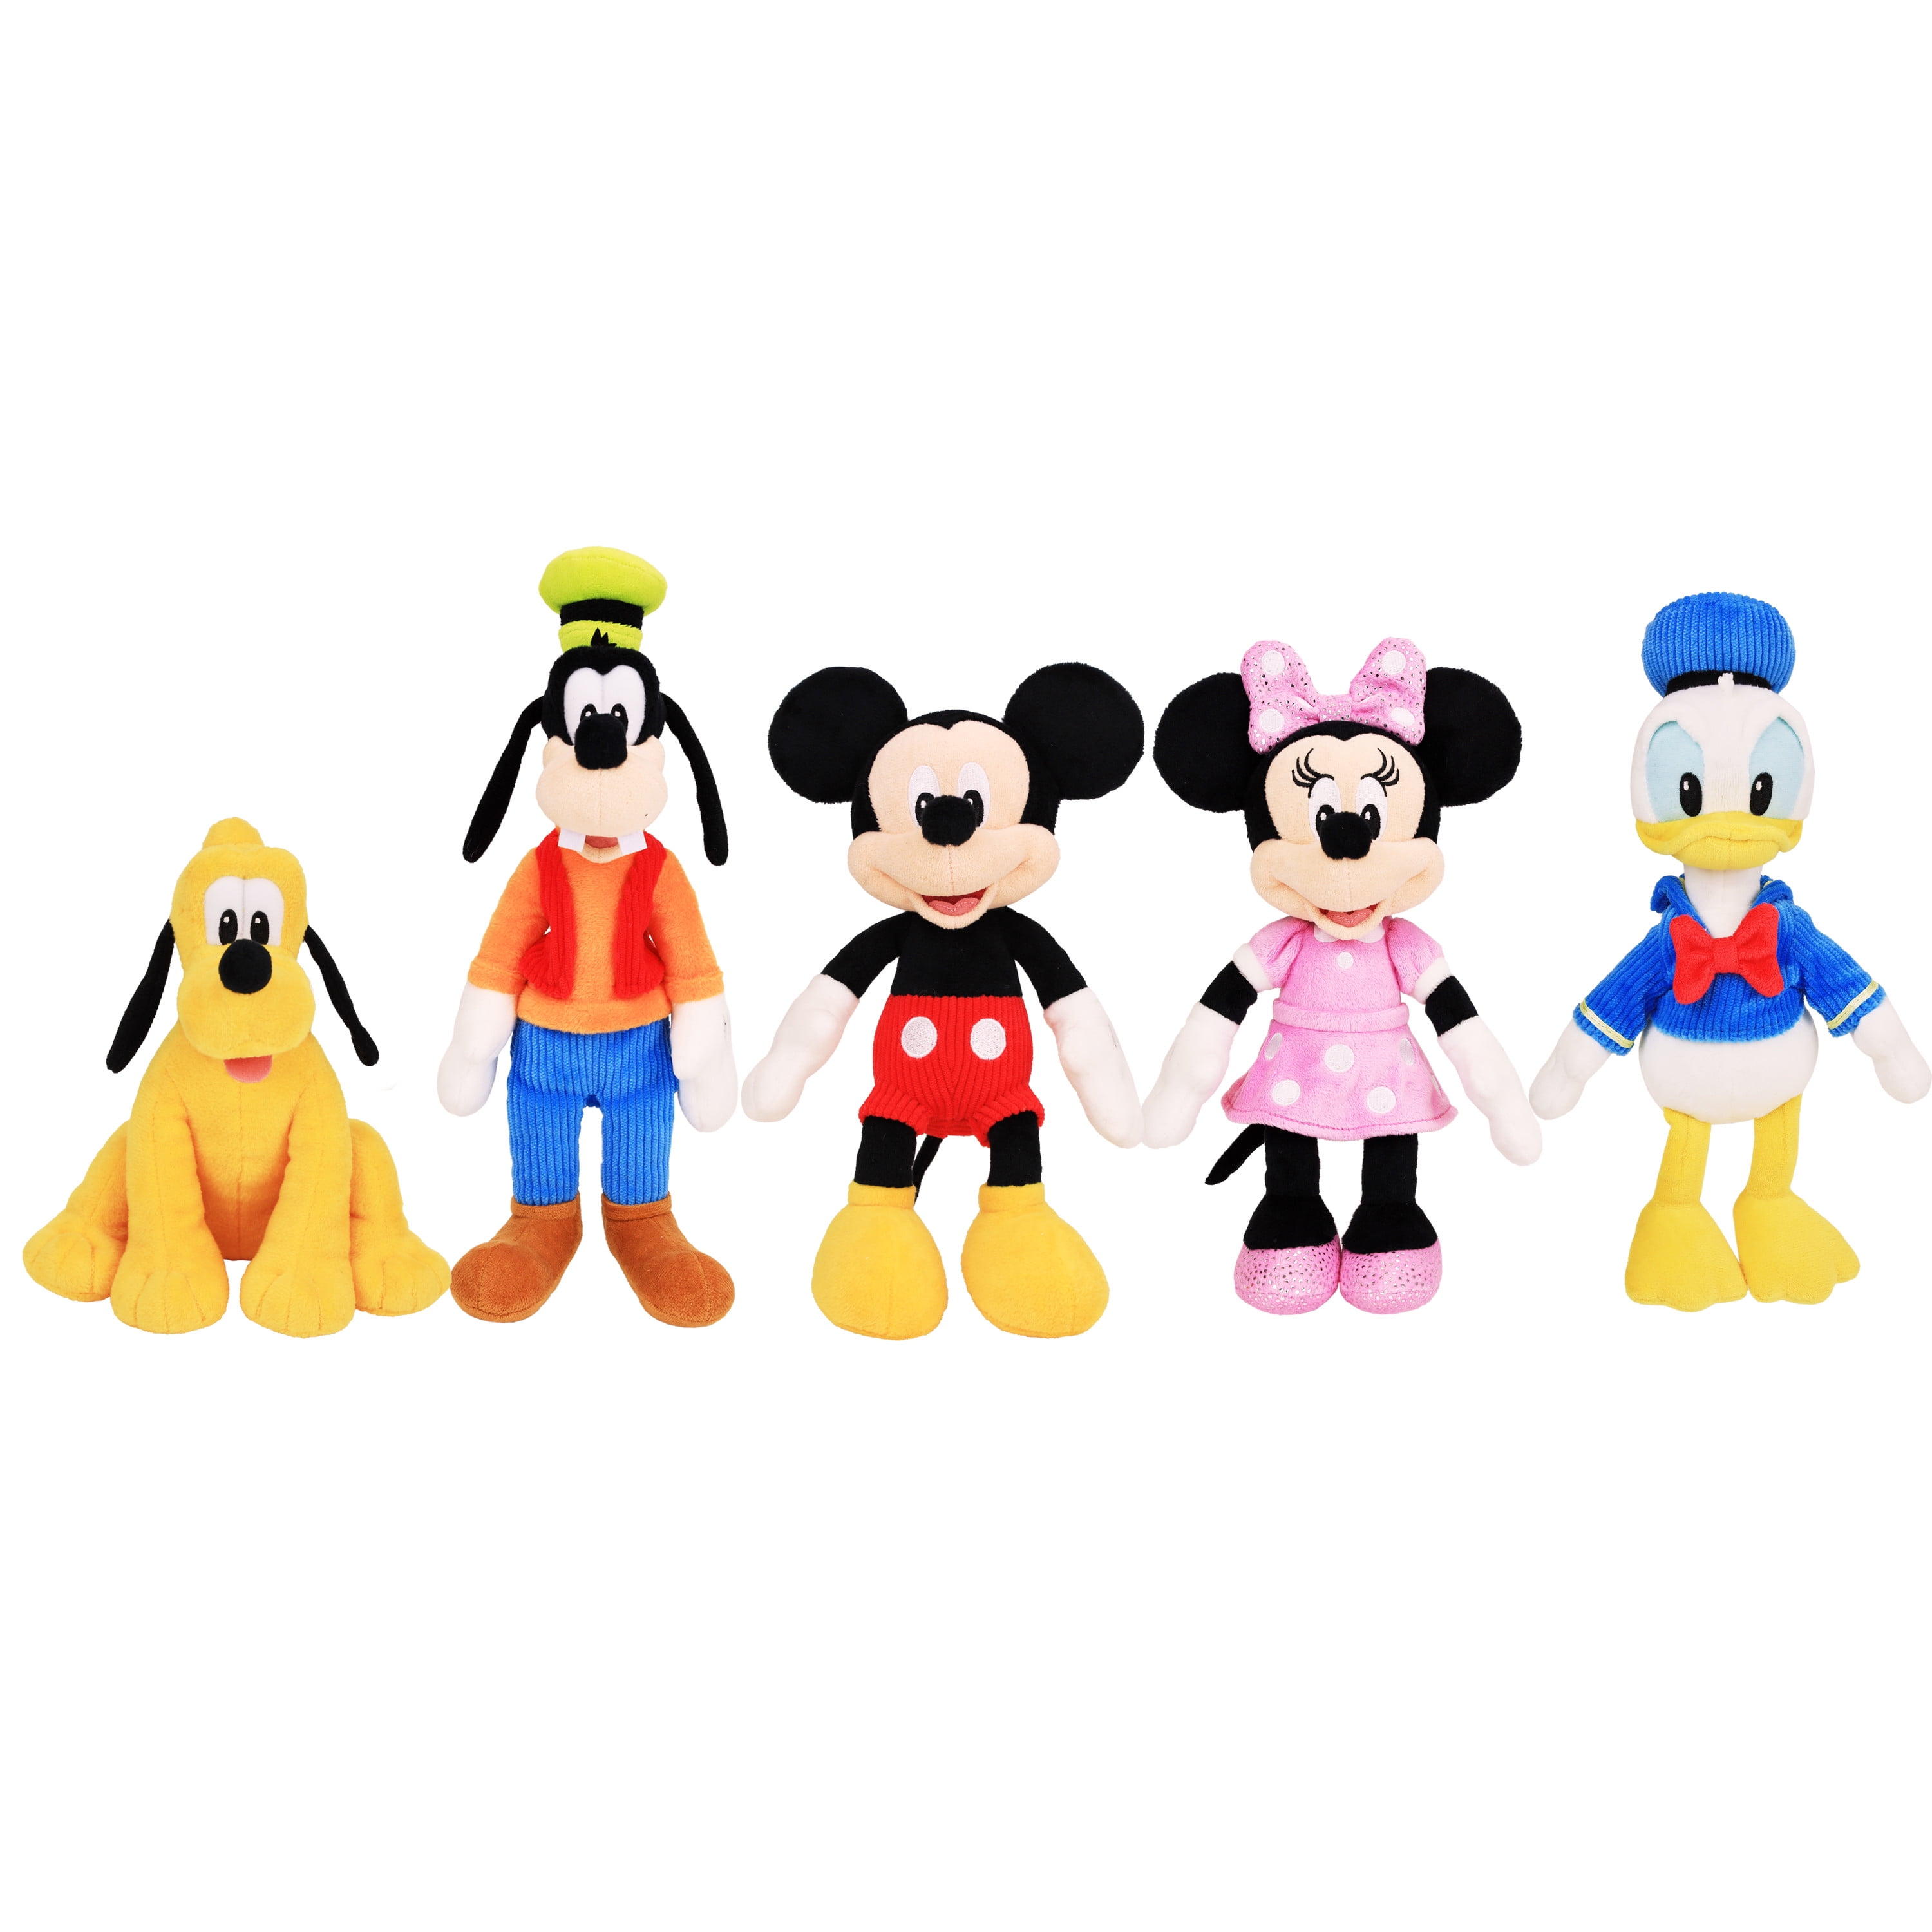 Boom Encyclopedie strijd Just Play Mickey Mouse Clubhouse 9-inch Bean Plush 5-pack, Mickey Mouse, Minnie  Mouse, Donald Duck, Goofy, and Pluto, Stuffed Animals, Preschool Ages 2 up  - Walmart.com